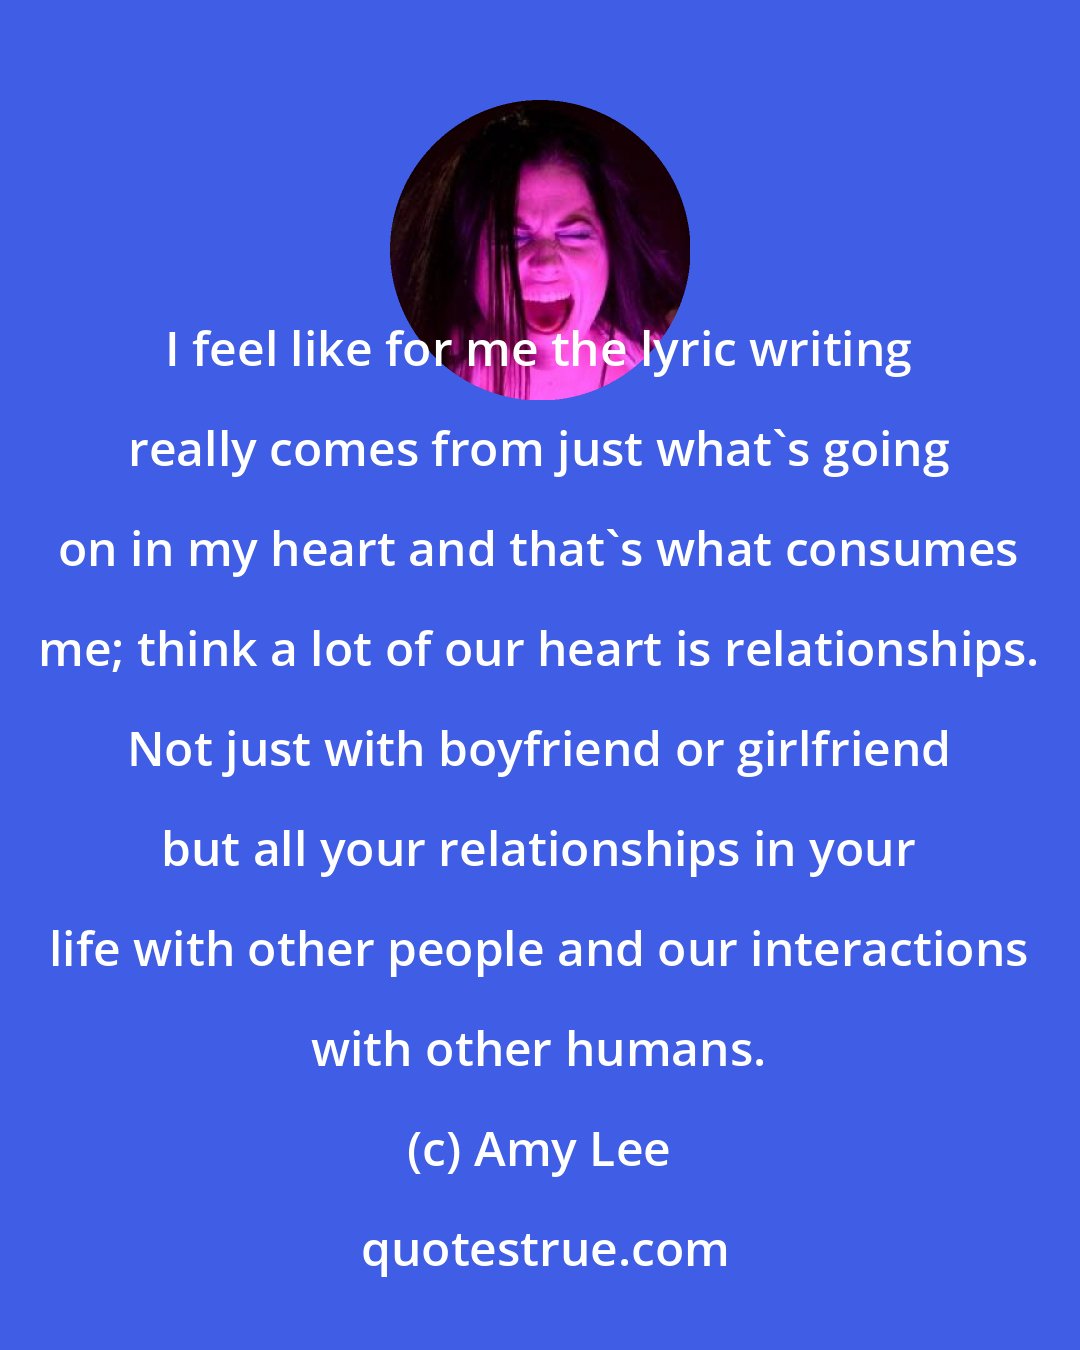 Amy Lee: I feel like for me the lyric writing really comes from just what's going on in my heart and that's what consumes me; think a lot of our heart is relationships. Not just with boyfriend or girlfriend but all your relationships in your life with other people and our interactions with other humans.